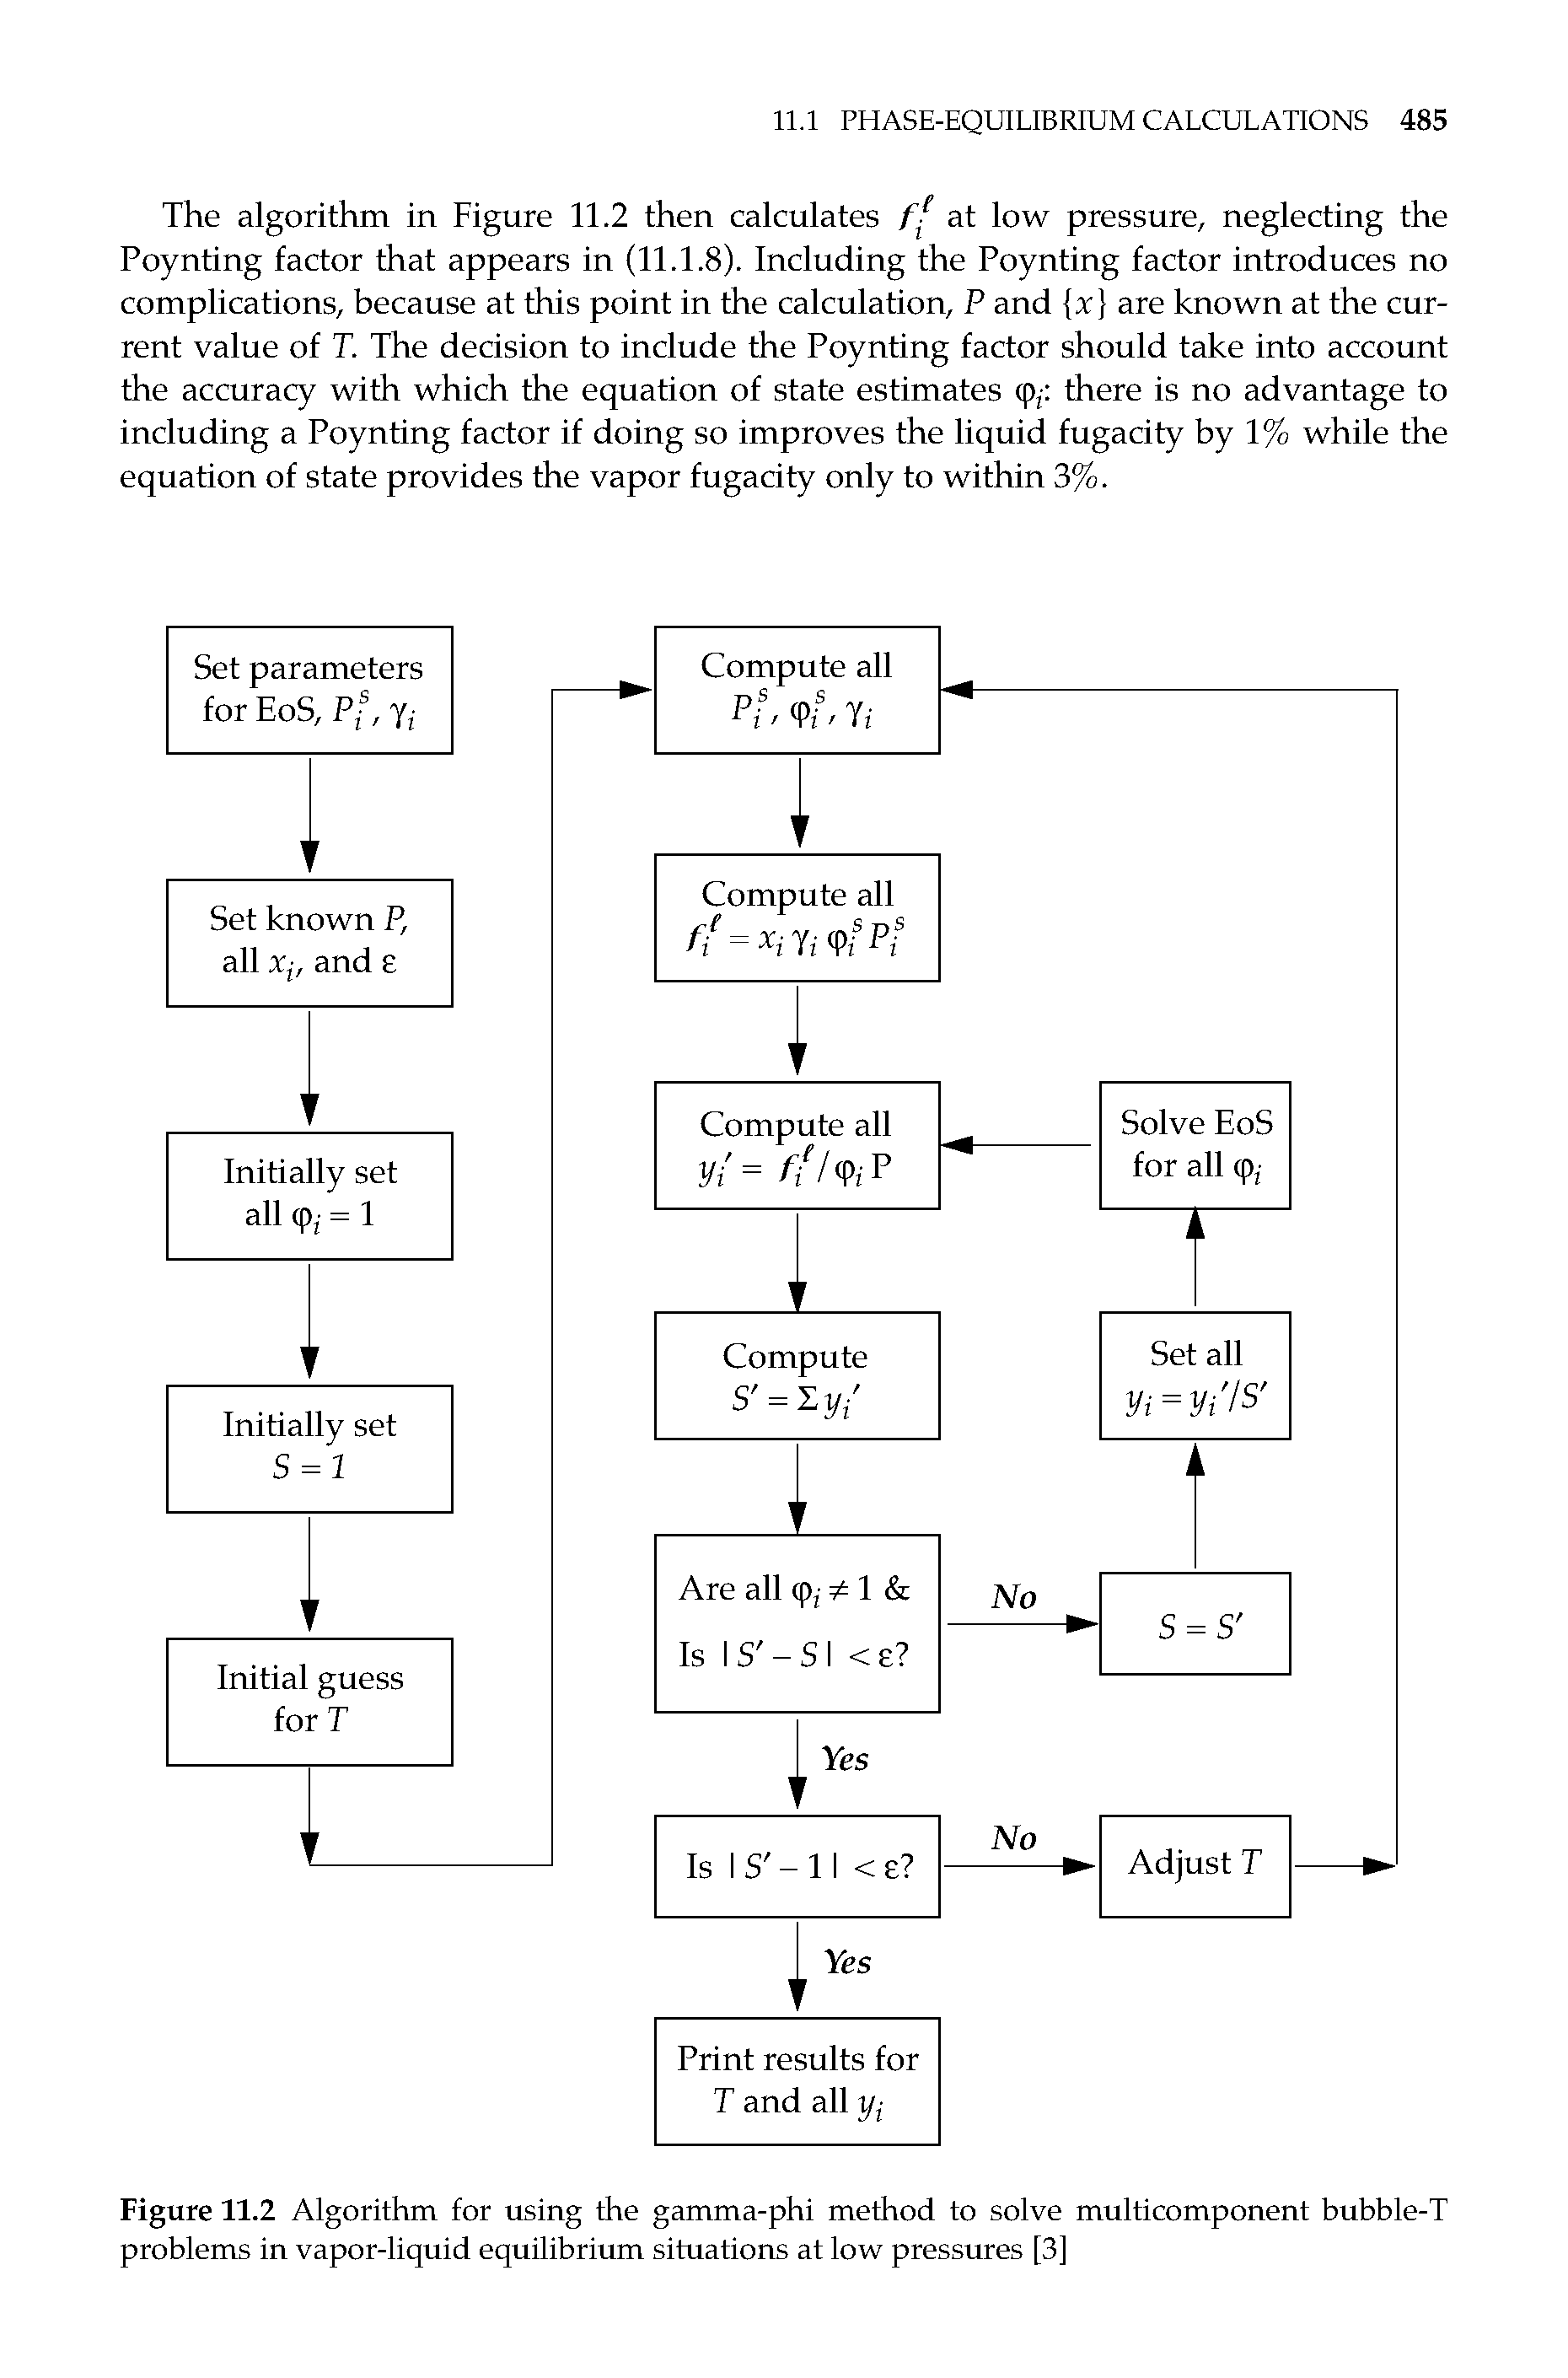 Figure 11.2 Algorithm for using the gamma-phi method to solve multicomponent bubble-T problems in vapor-liquid equilibrium situations at low pressures [3]...